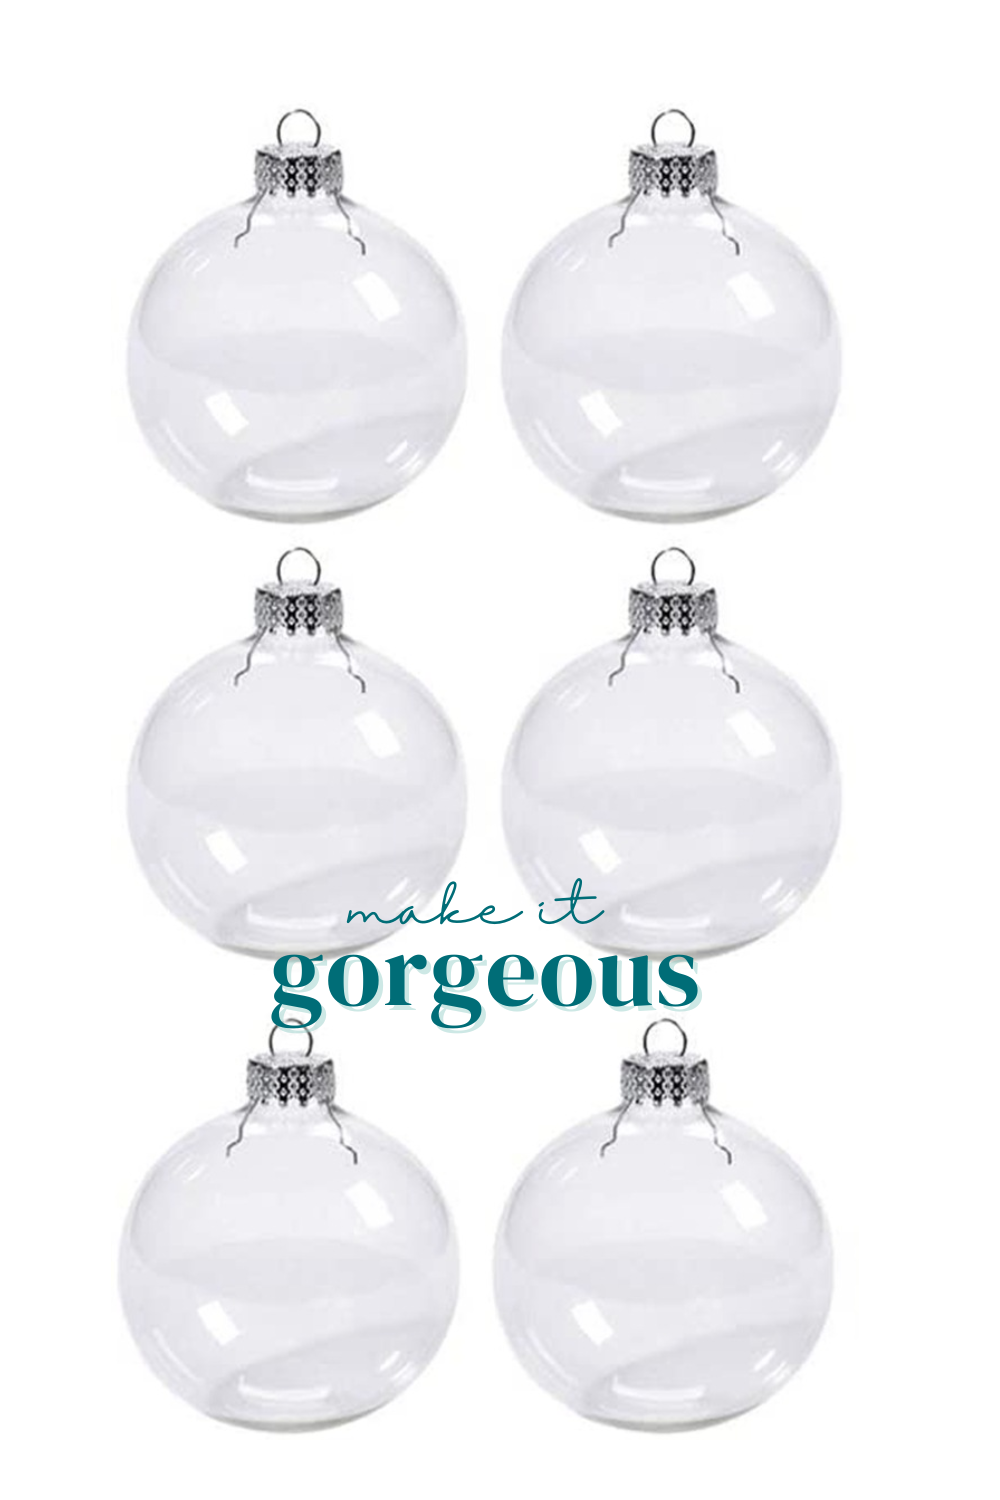 Fillable high quality Bauble for Christmas